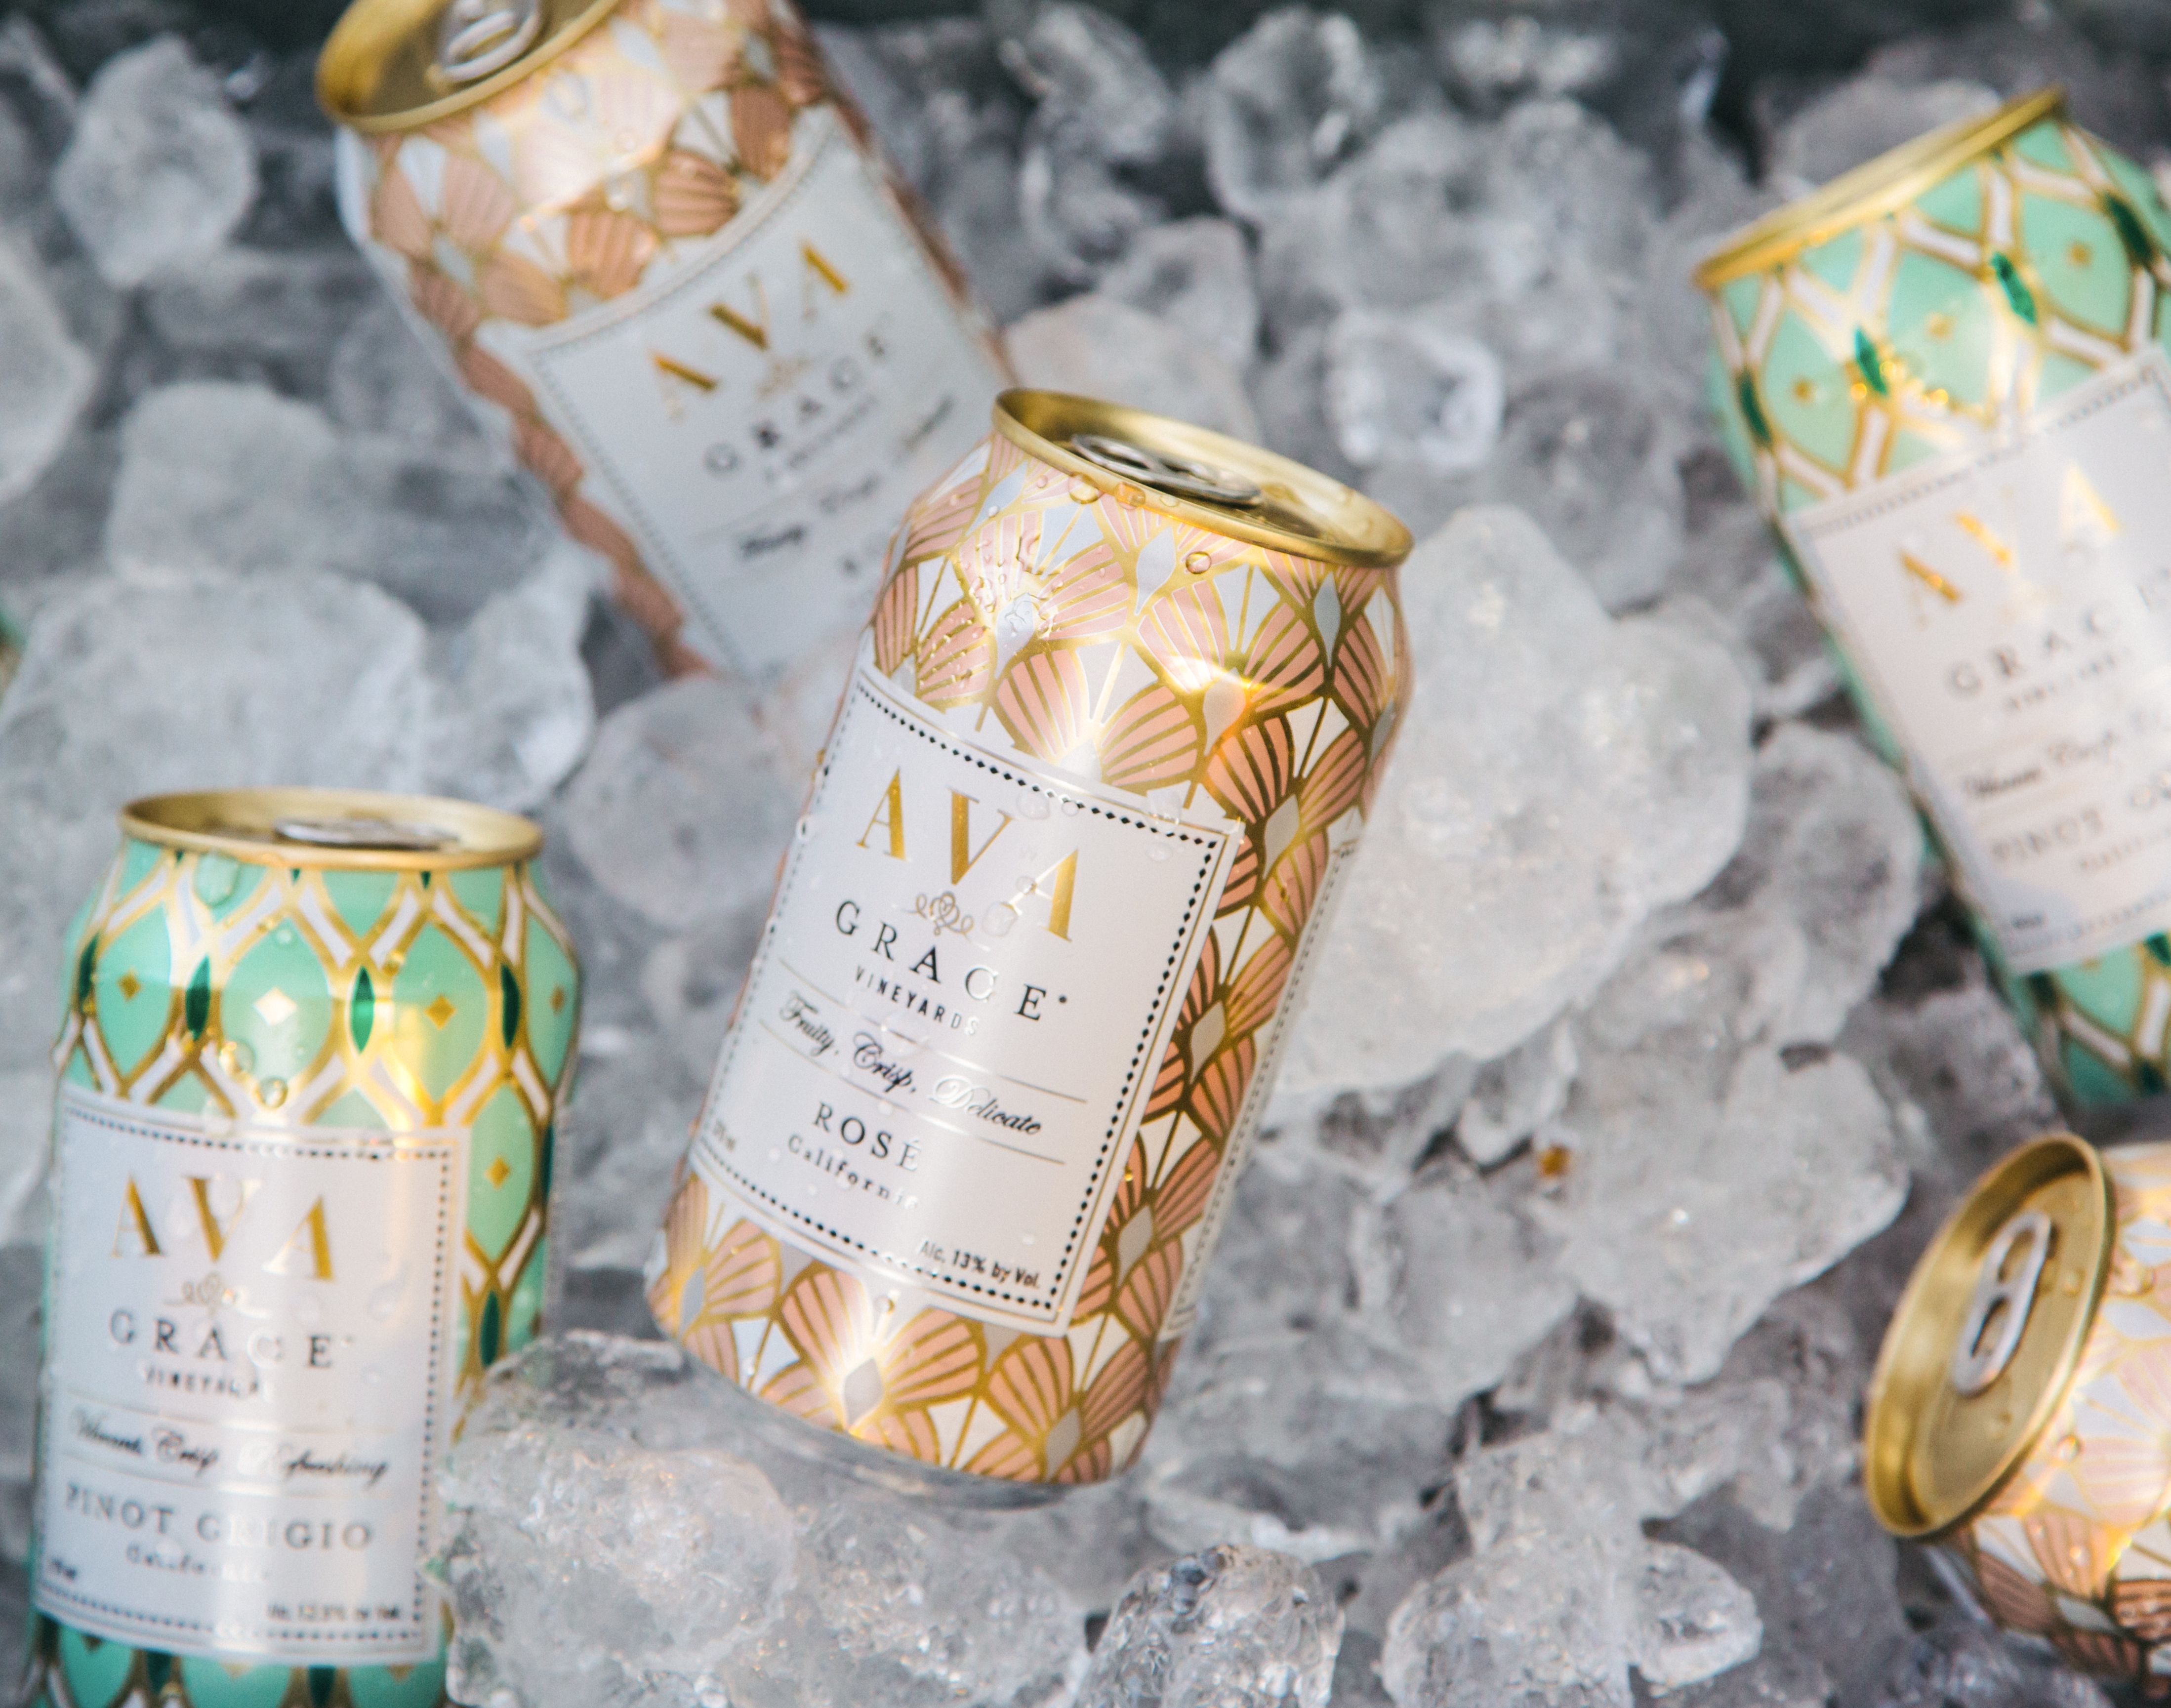 AVA Grace wine cans on ice in a cooler